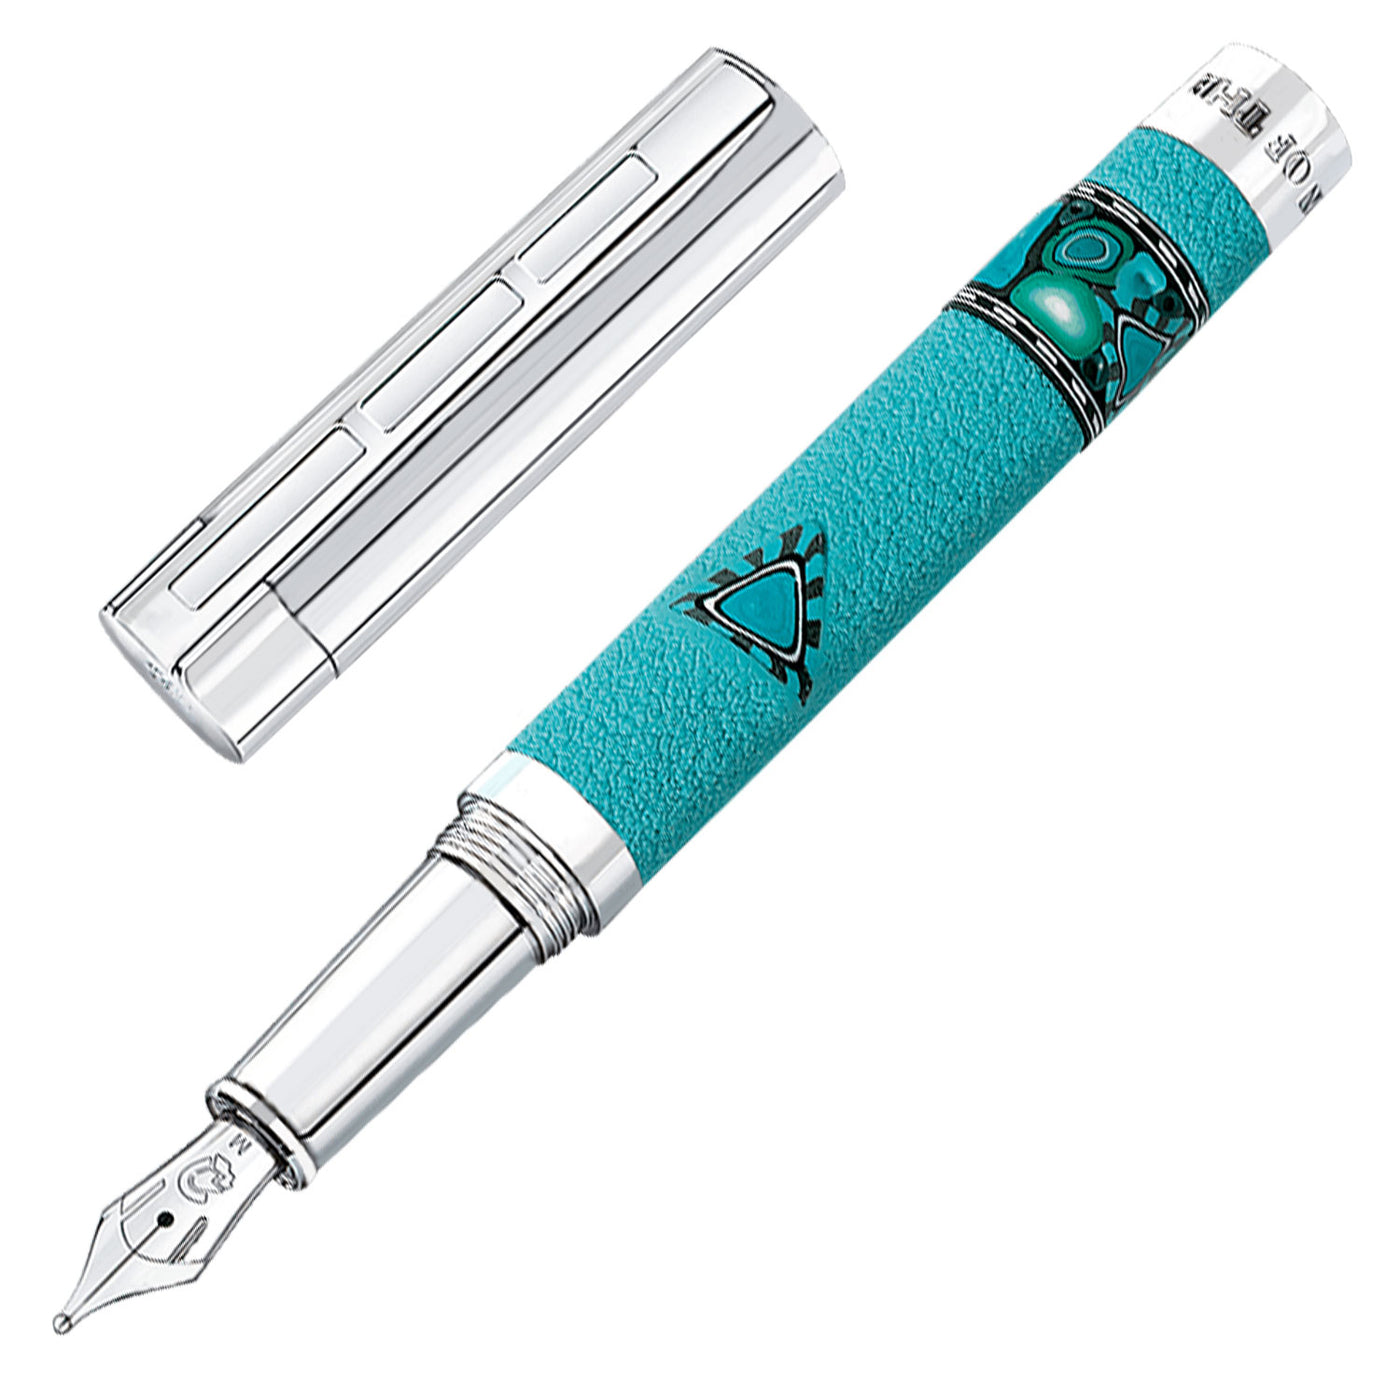 Staedtler Premium Pen of the Season Fountain Pen - Summer 2015 (Limited Edition) 1